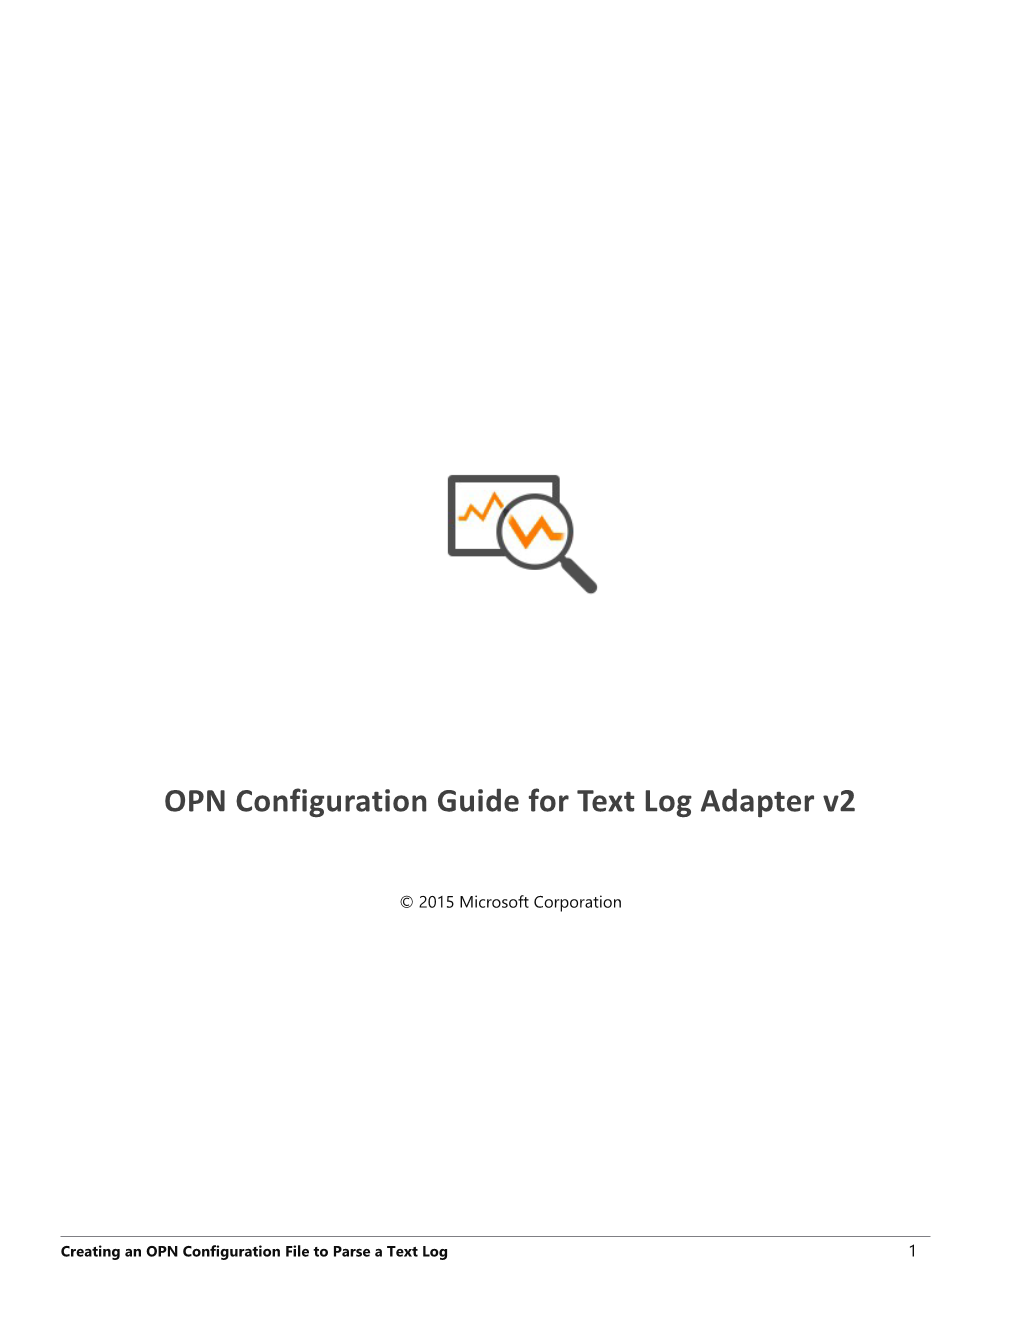 OPN Configuration Guide for Text Log Adapter V2